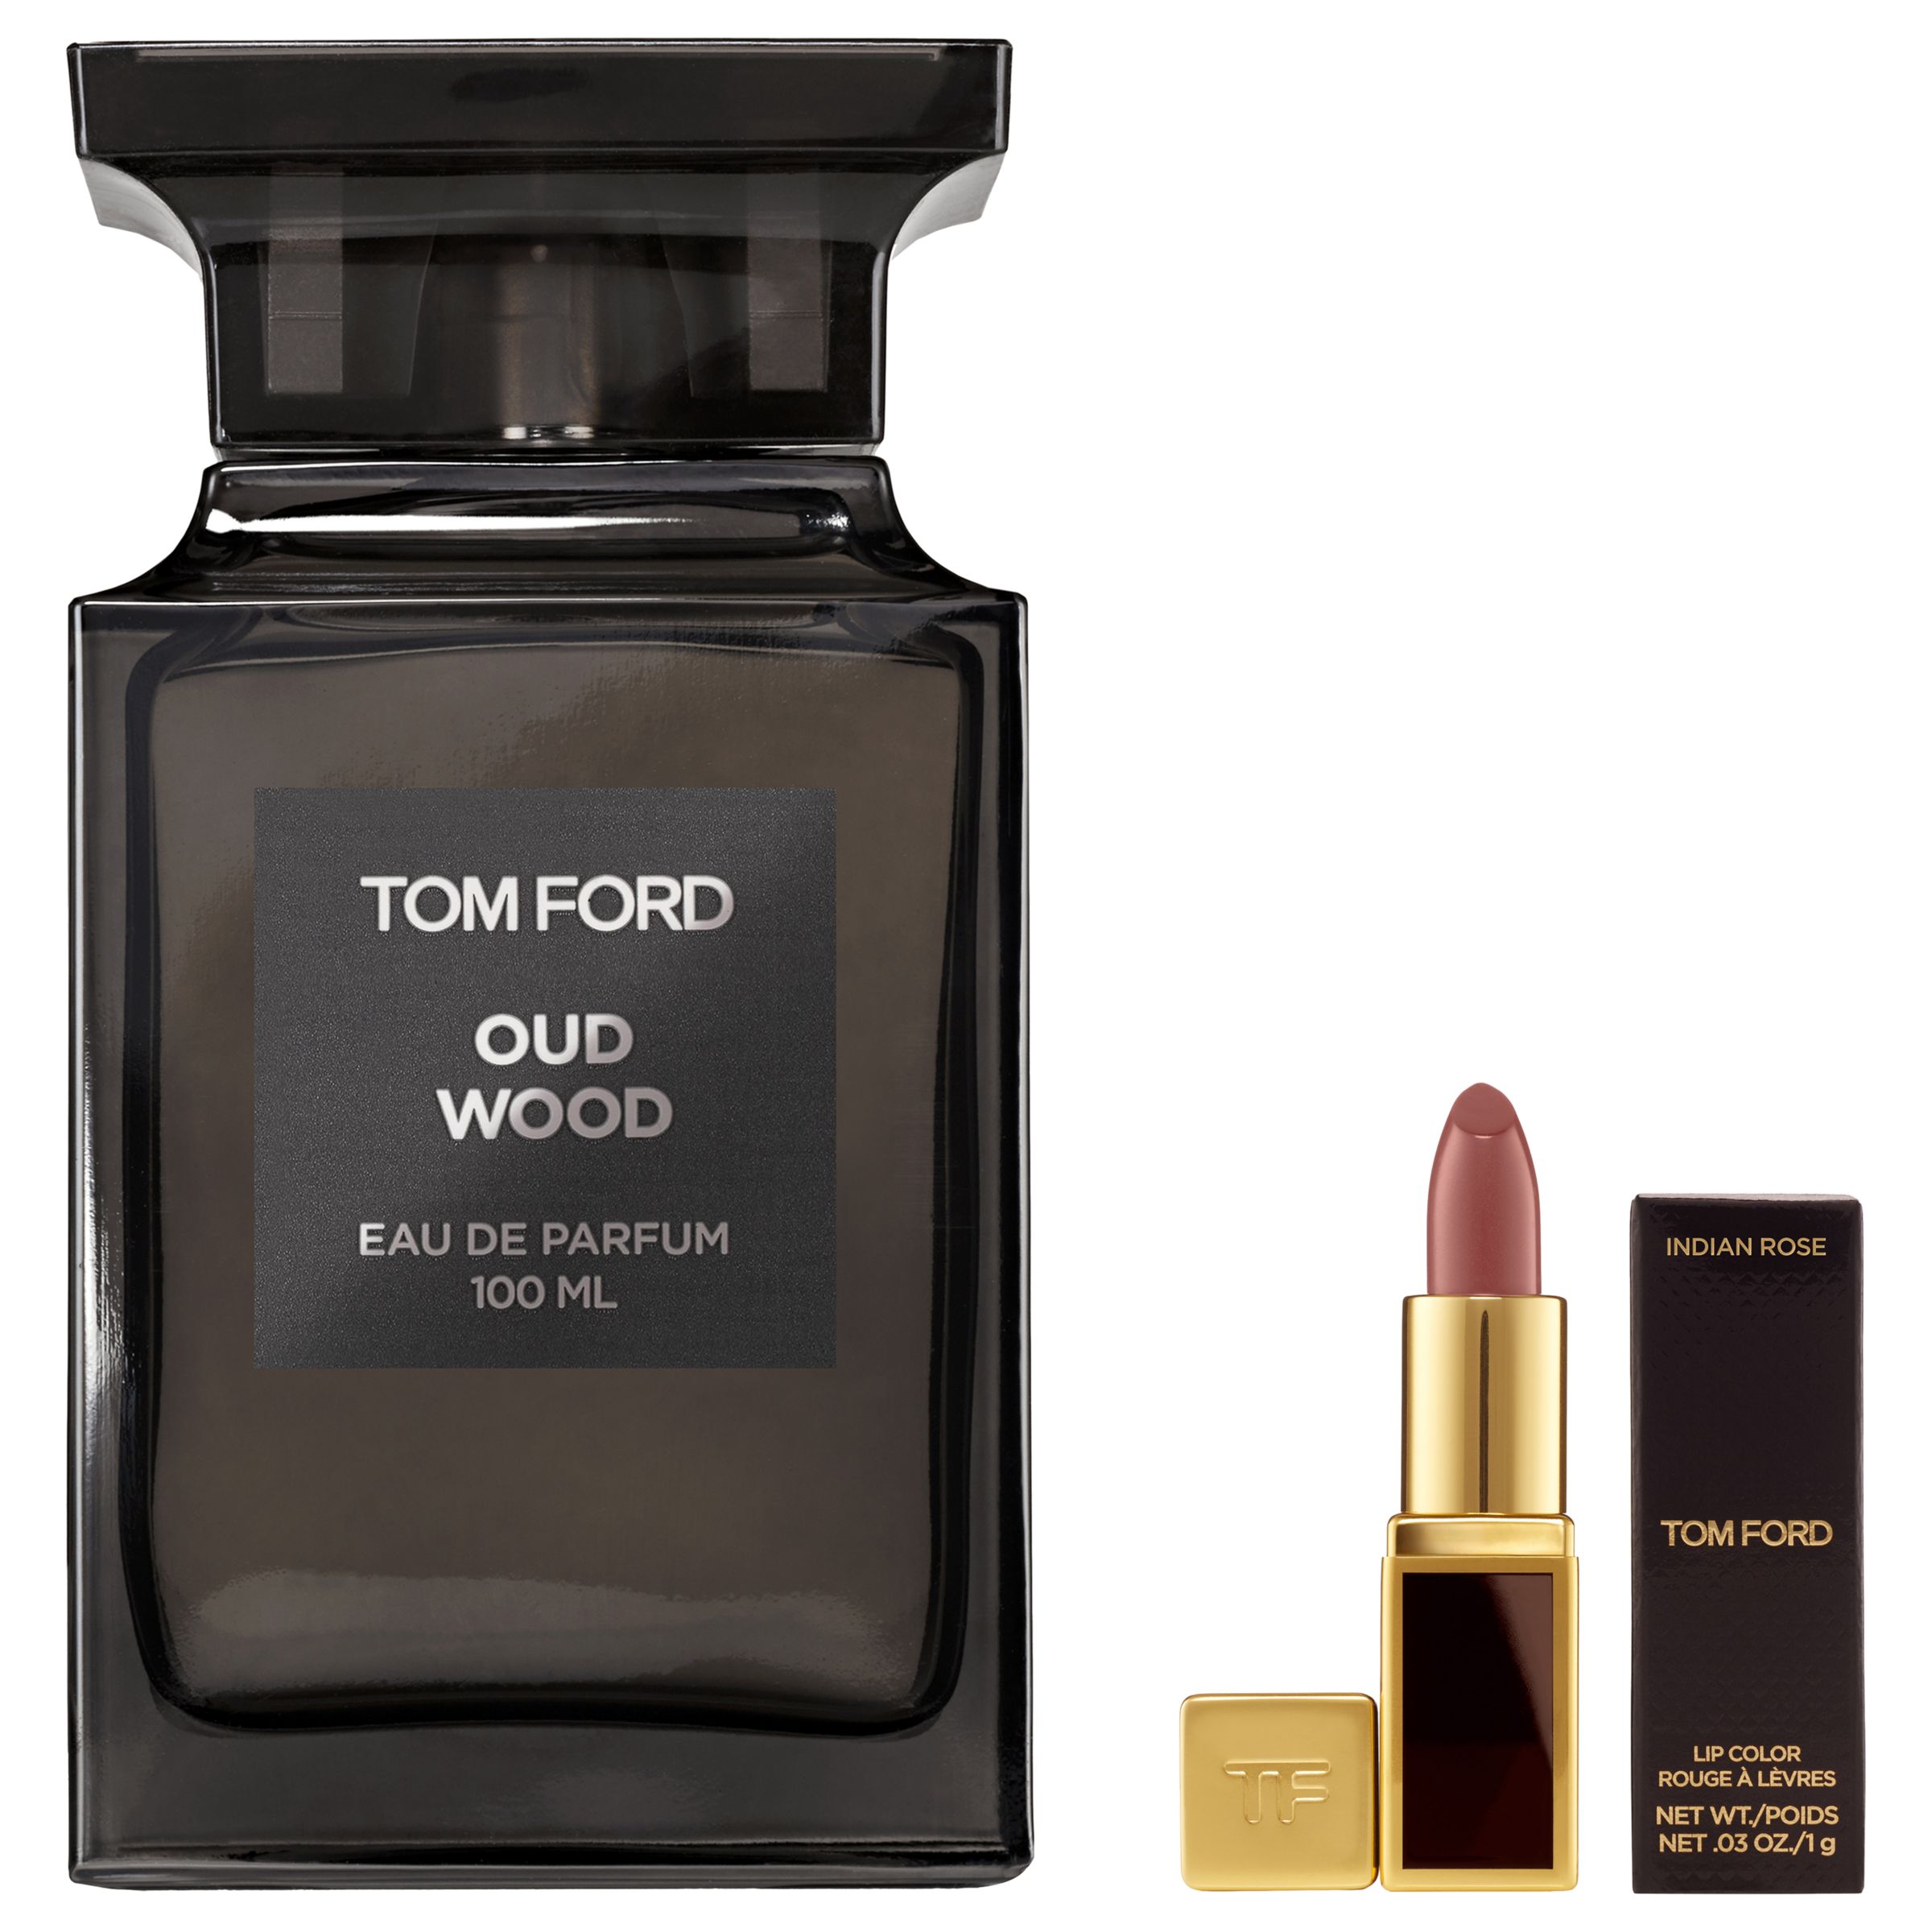 TOM FORD Private Blend Oud Wood Eau De Parfum, 100ml with Gift